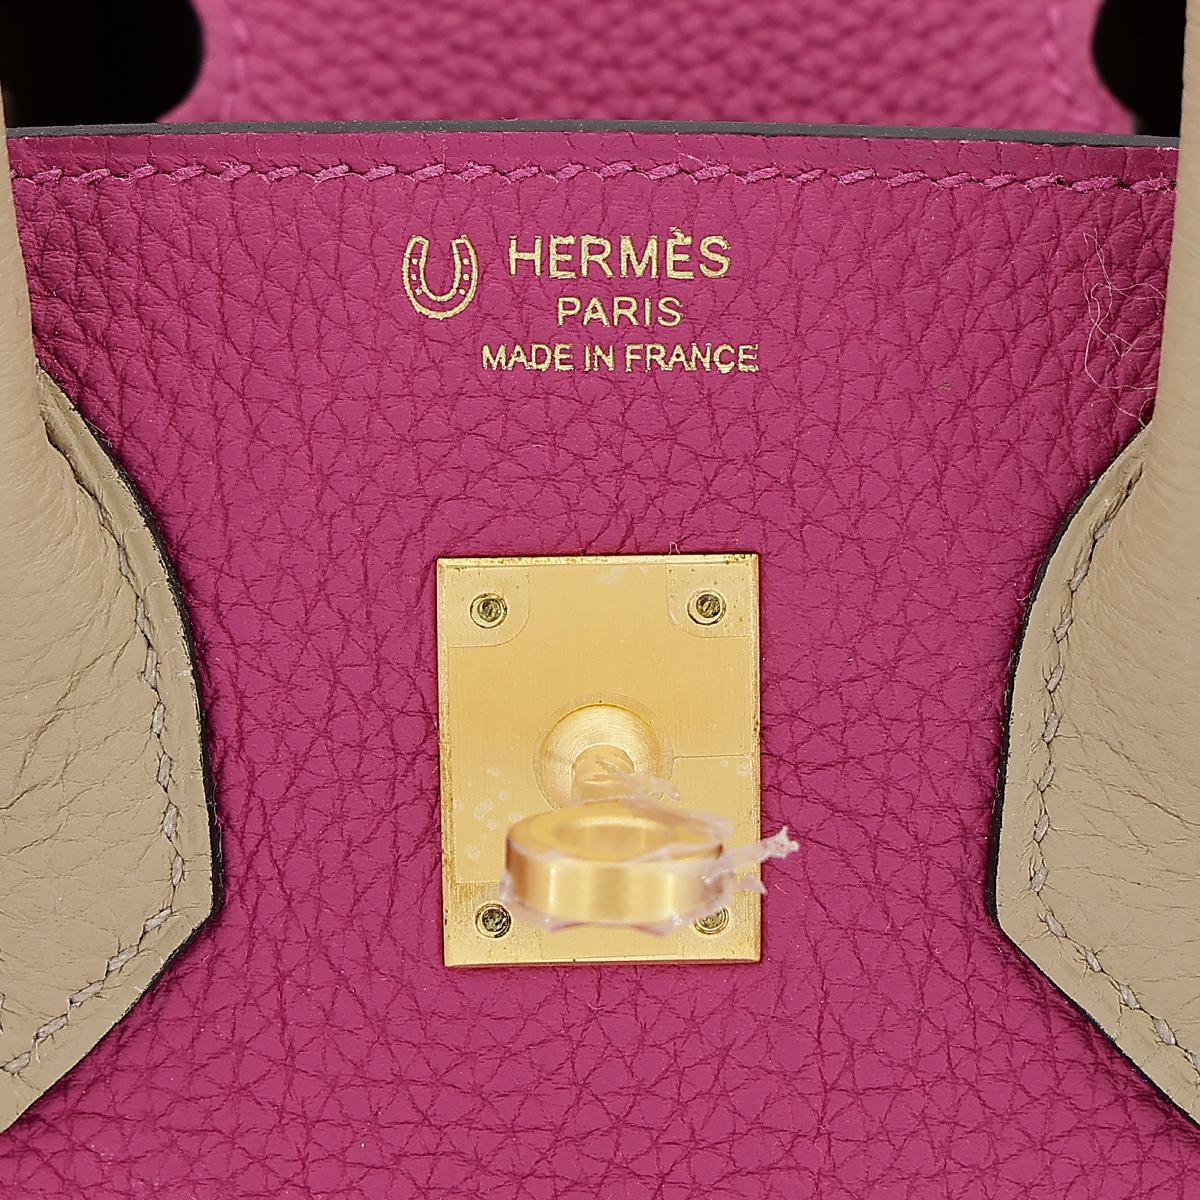 New Condition
From 2019 Collection
HSS
Rose Purple, Trench 
Togo Leather
Brushed Gold Hardware
Includes  Padlock, Clochette, Key, Dustbag
Measures 9.85